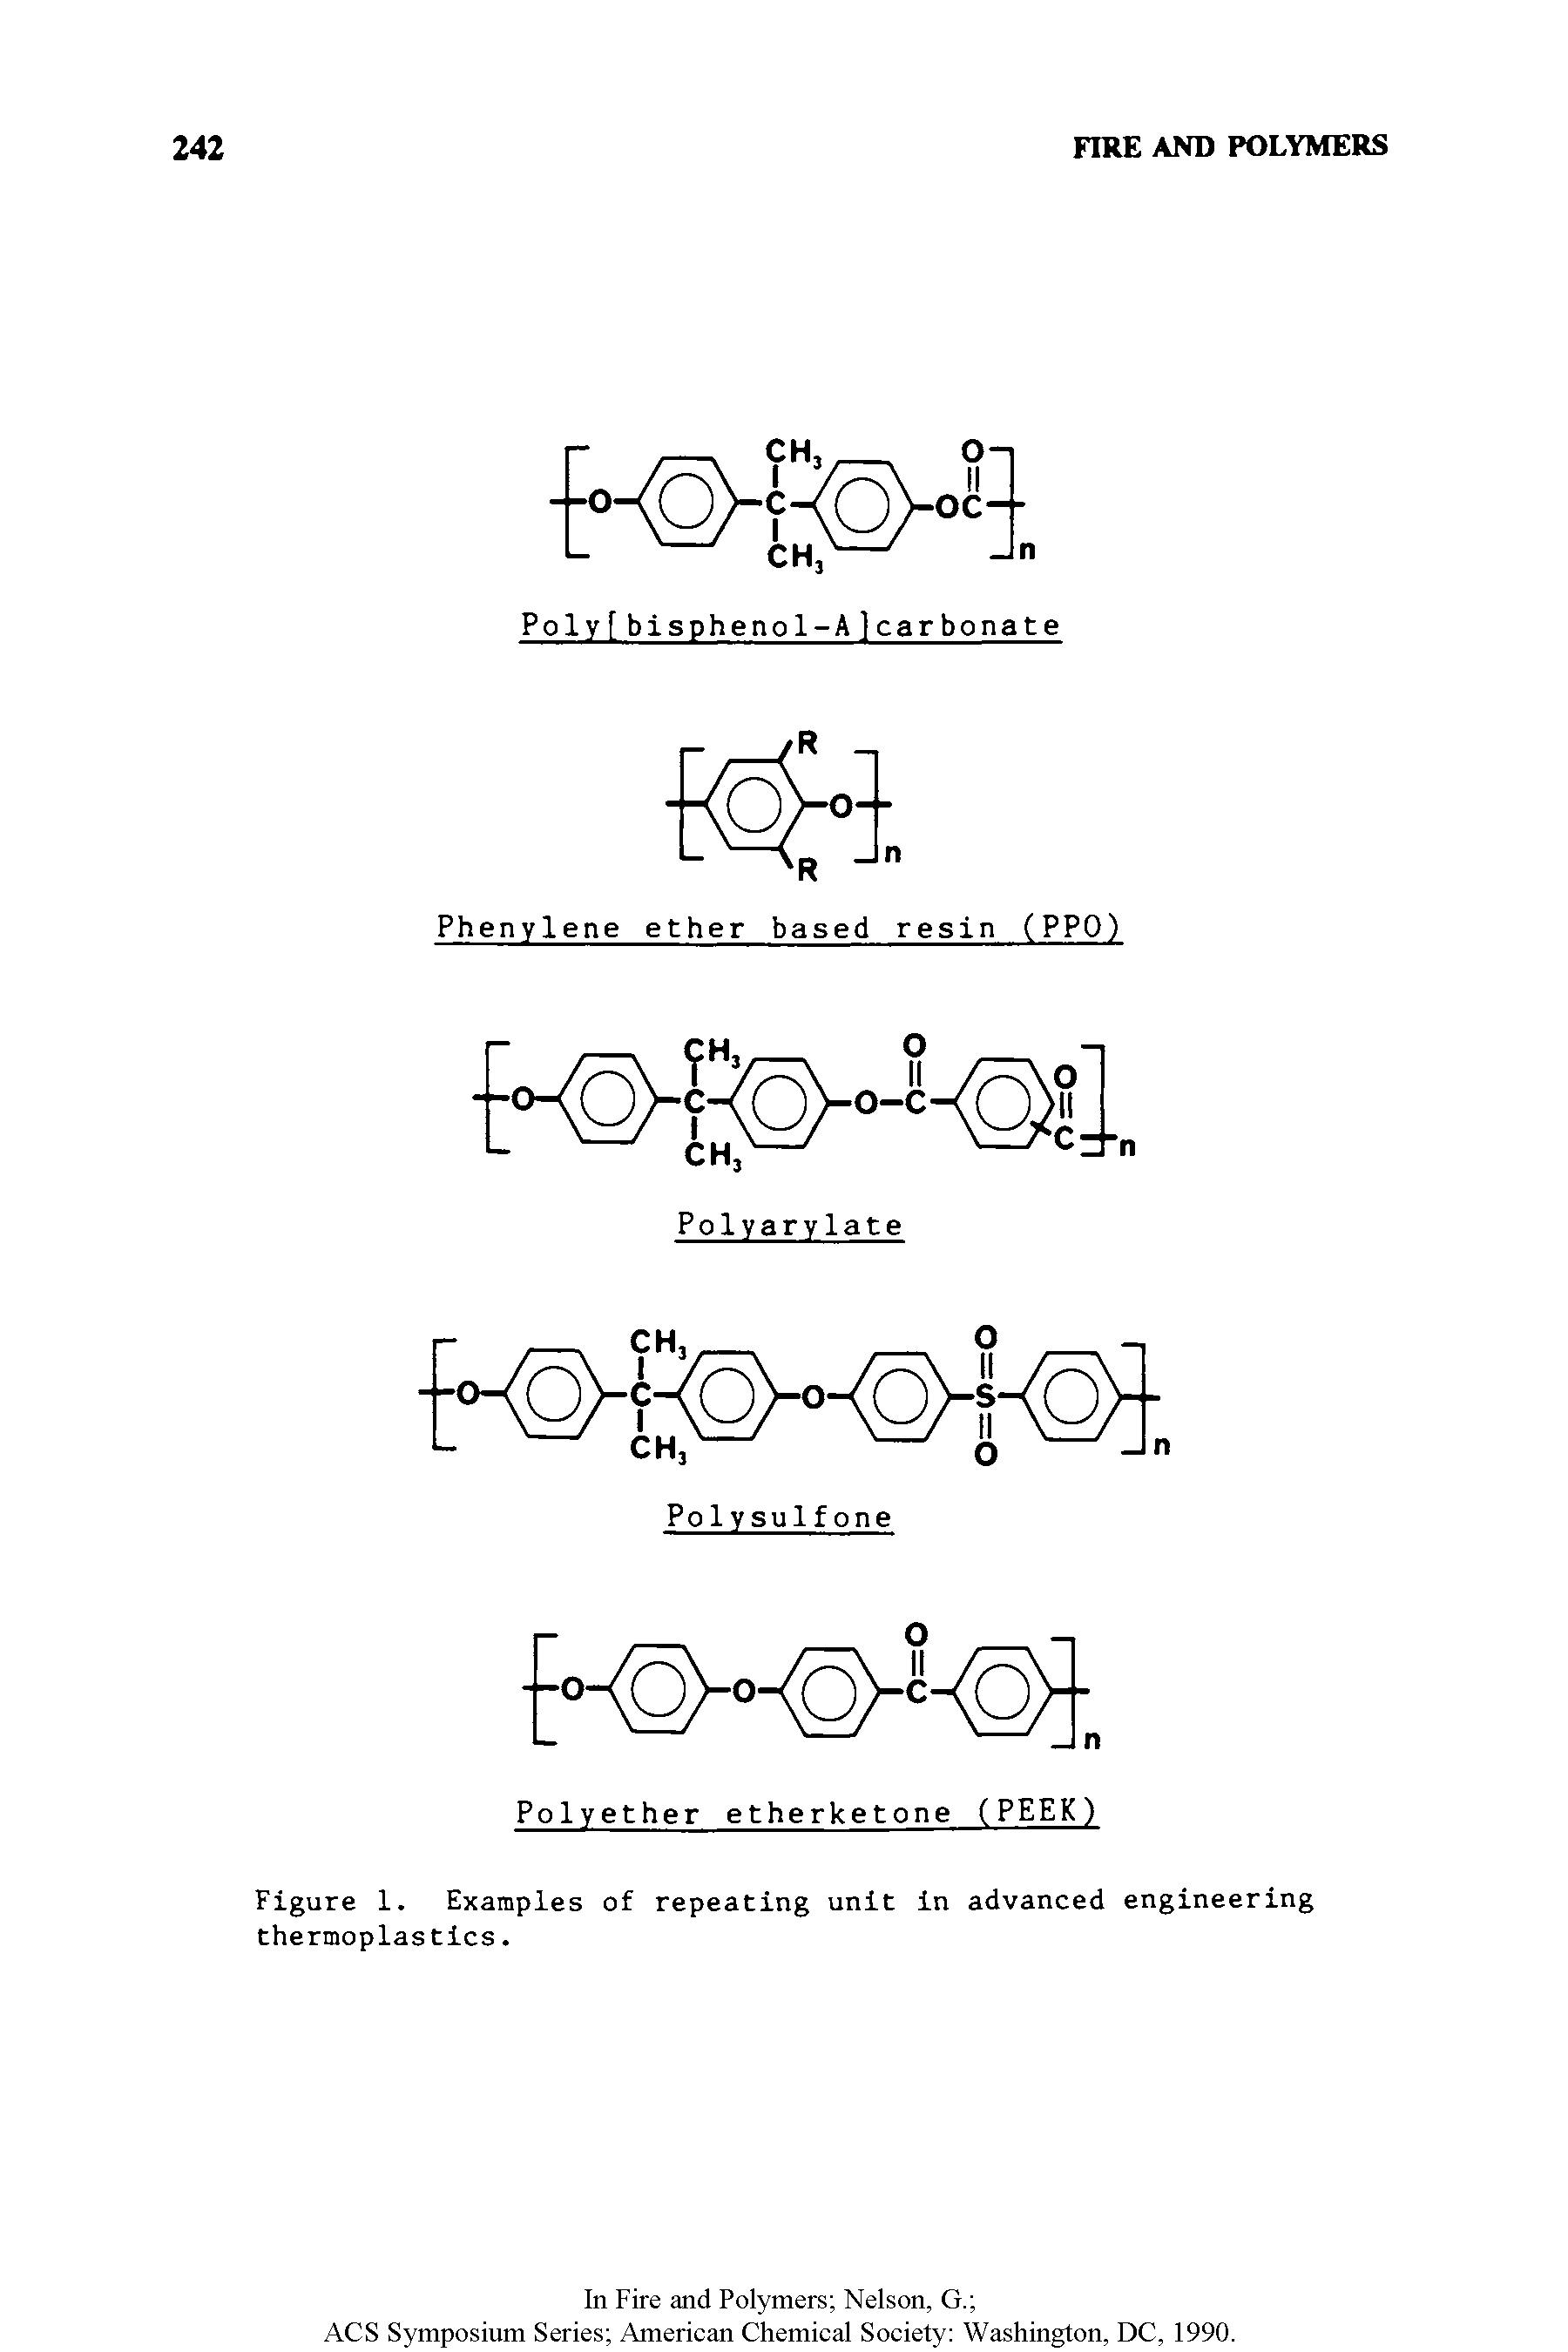 Figure 1. Examples of repeating unit in advanced engineering thermoplastics.